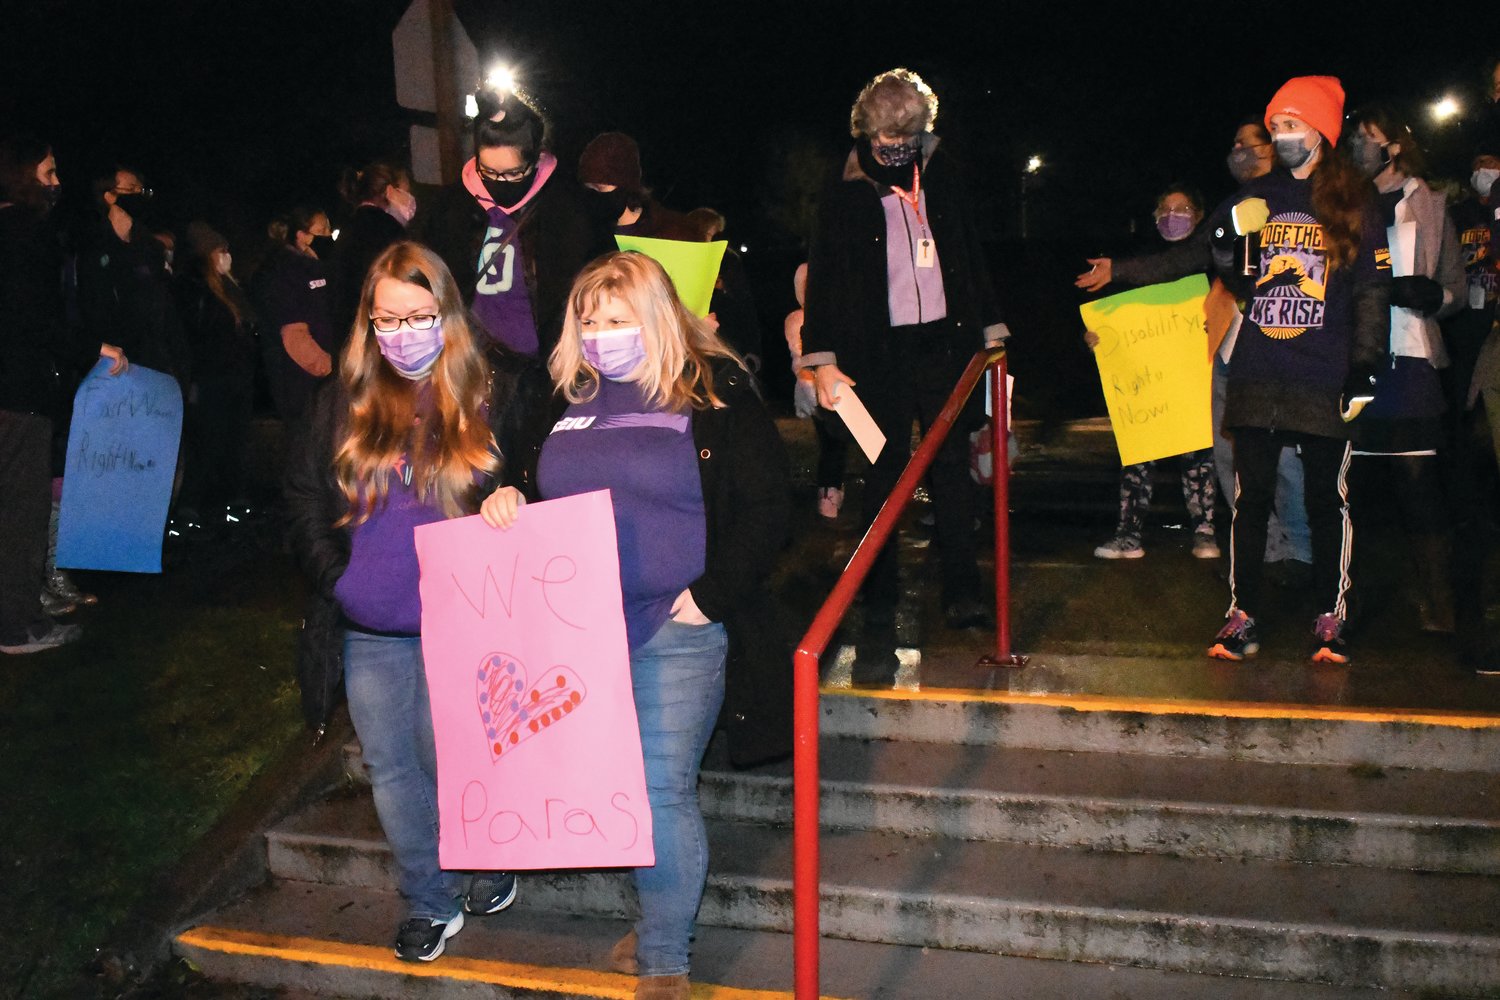 Paraeducators and classified school staff members enter the Port Townsend School district’s front office building to attend the board meeting and give public comments advocating for higher wages.